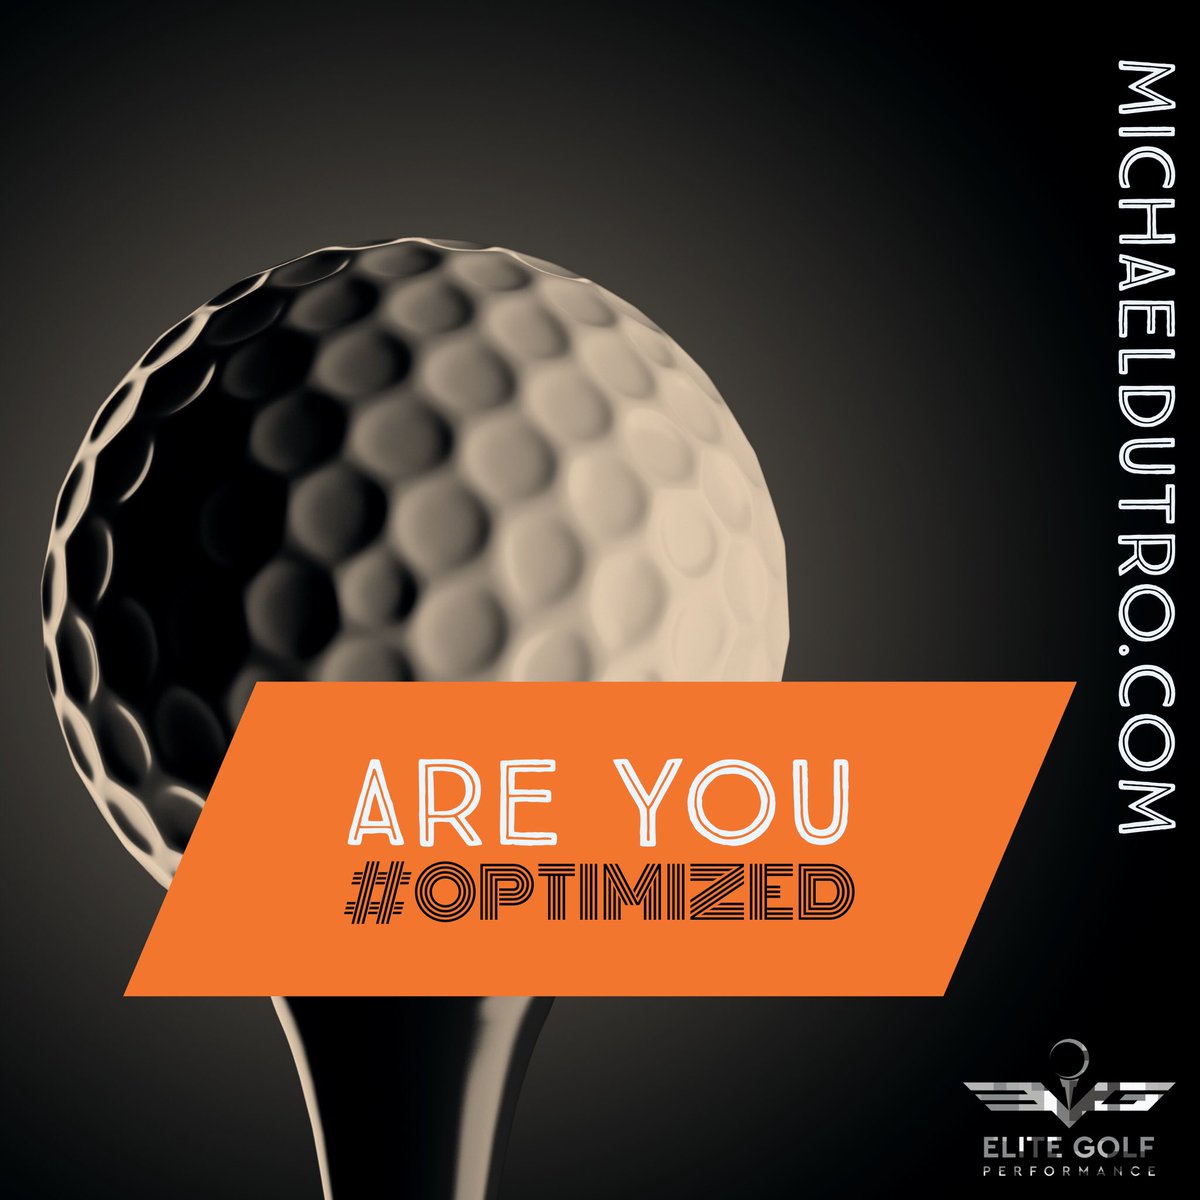 No more excuses, the time is now. You either are, or you’re not. #KNOWyourbest #areyouoptimized #elitegolfperformance #thewanderinglearner michaeldutro.com #golf #golfinstruction #trackman #michigangolf #said #pga #certified